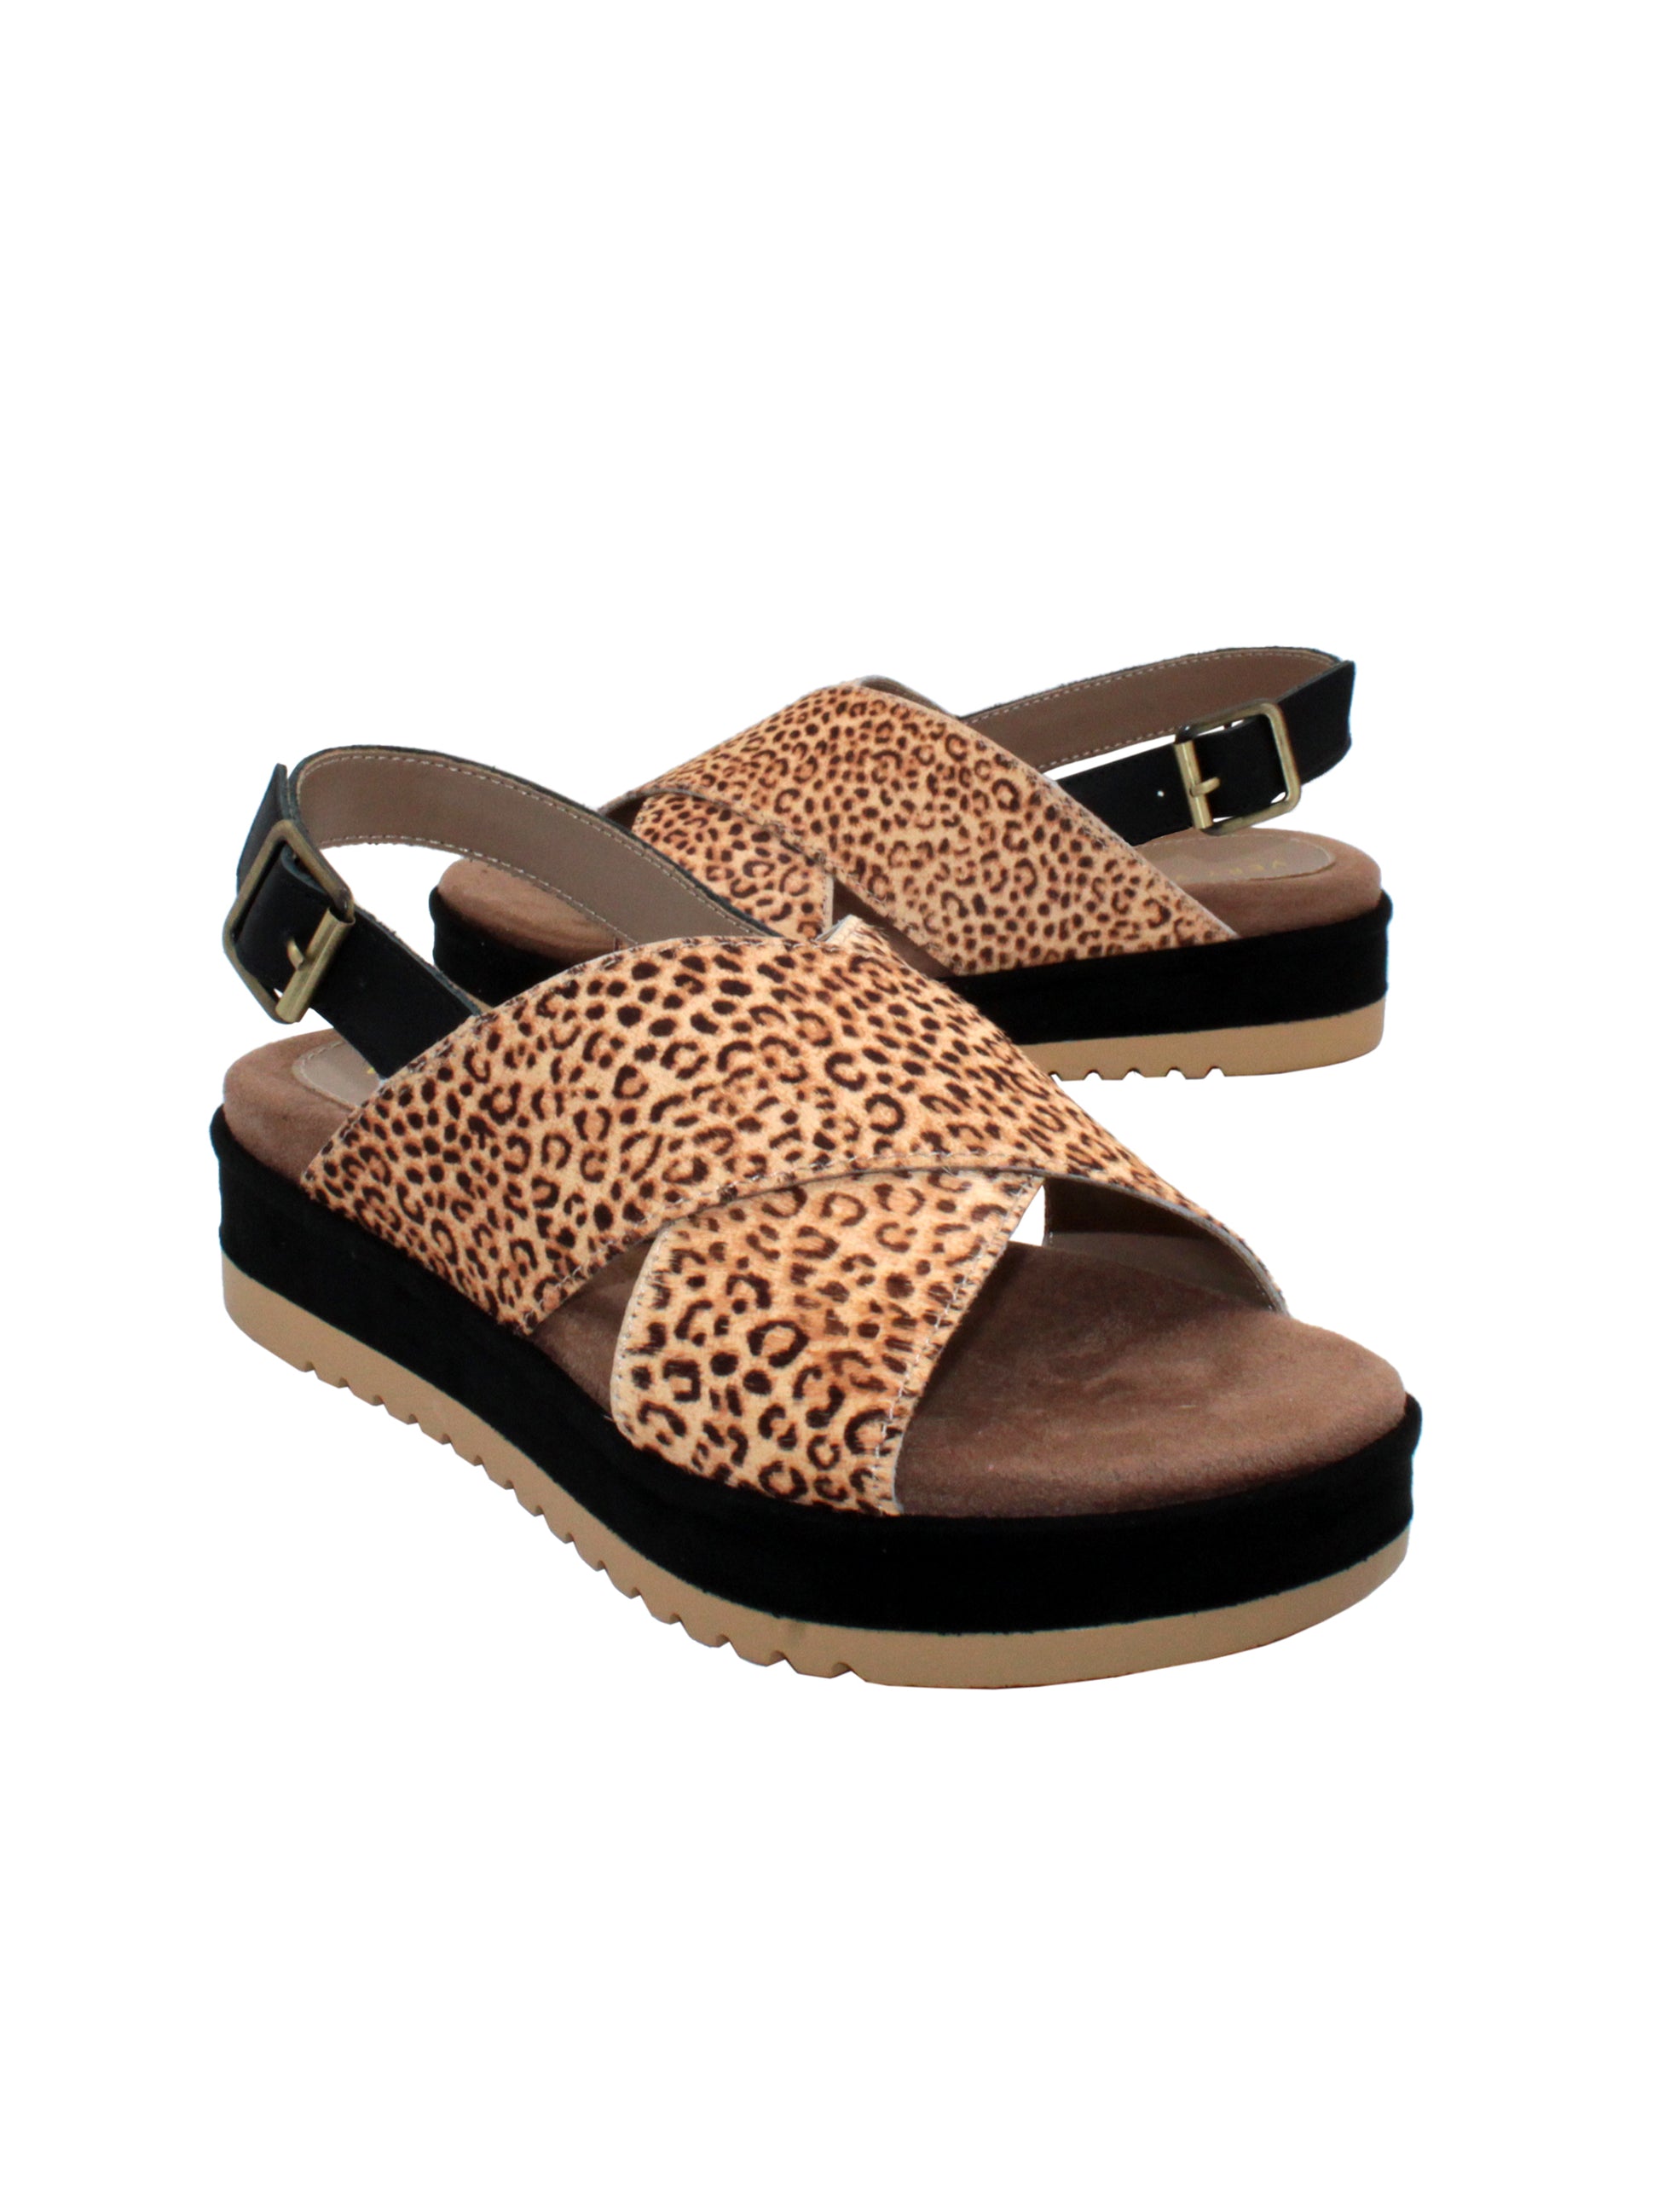 Calabar is Very Volatile’s crisscross sandal with adjustable sling comes to life in genuine animal printed calf hair. Featuring a cushioned footbed for all day wear. Pair this with jeans or your favorite dress for elevated comfort and style tan leopard 3/4 angle